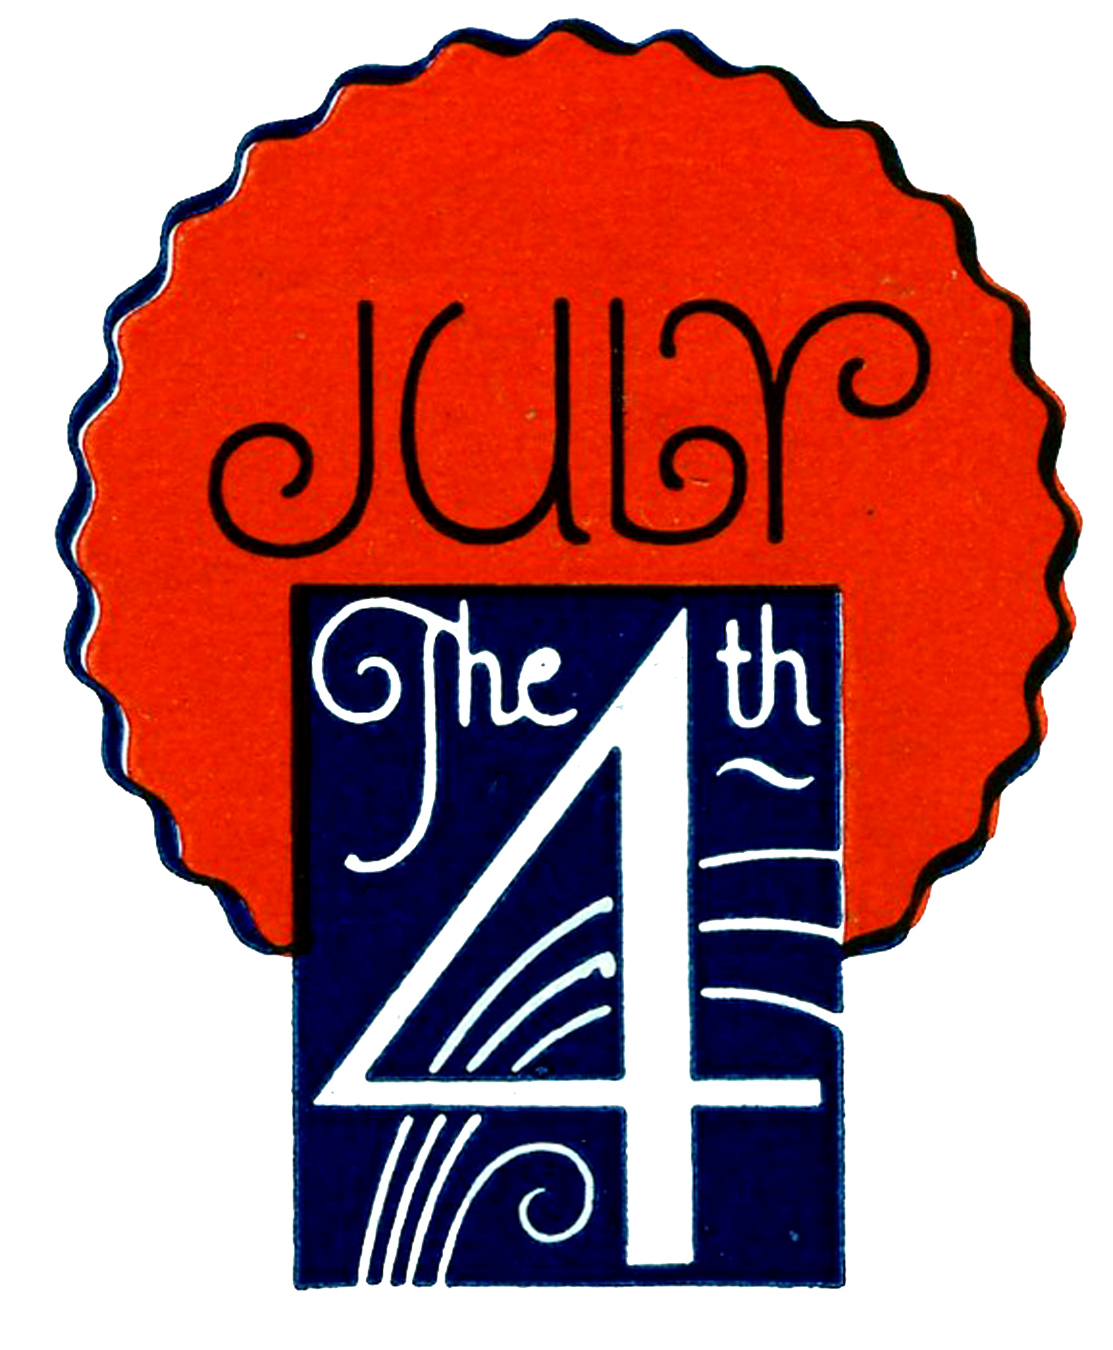 July 4th clip art showing date